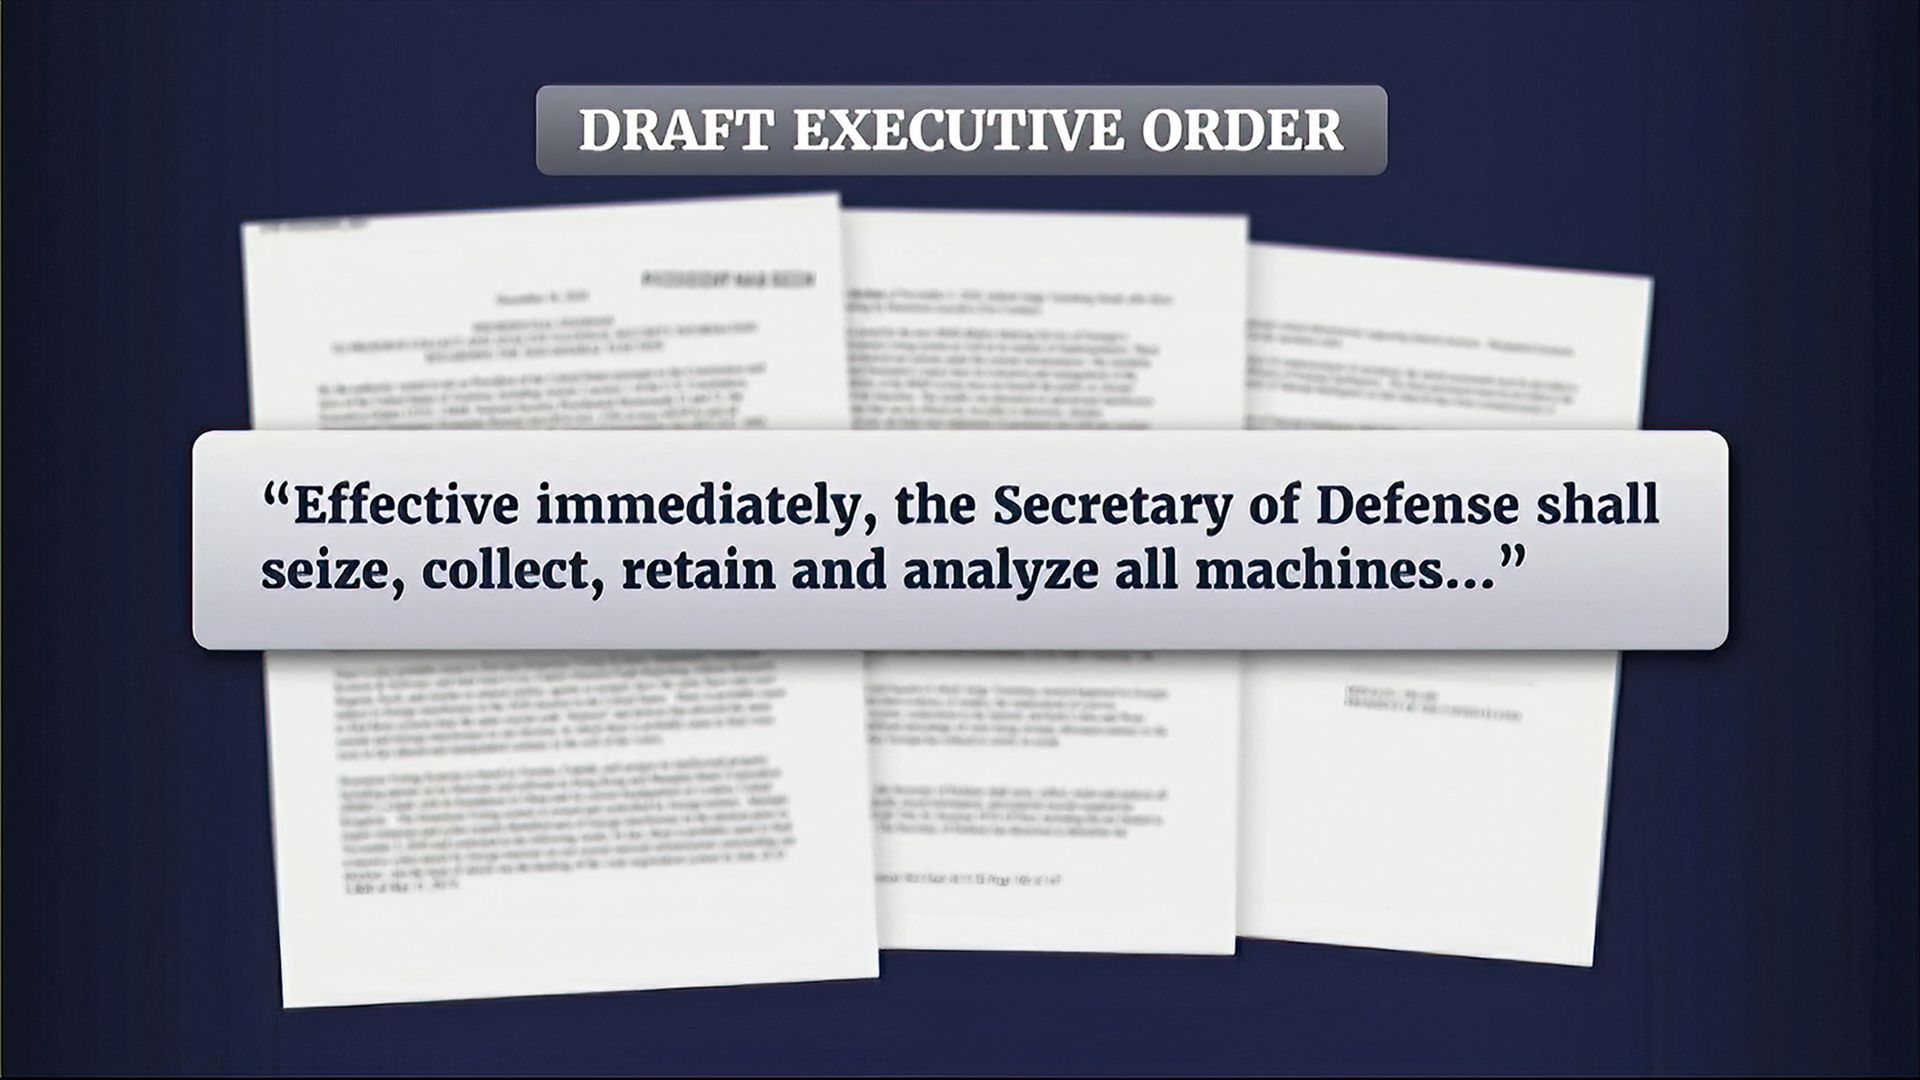 This proposed executive order was shown at last week's hearing.